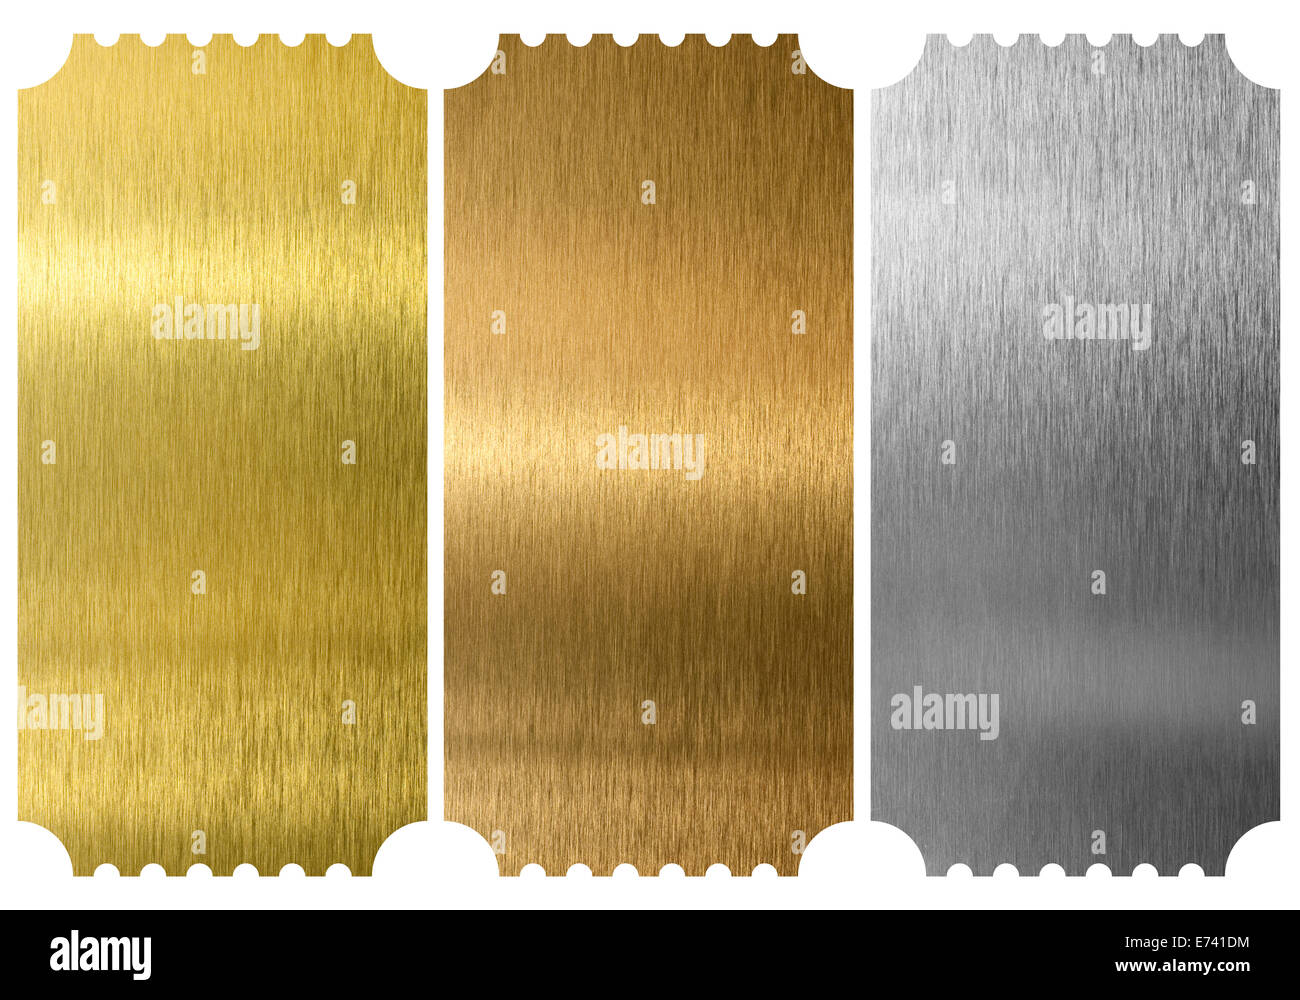 Aluminum, bronze and brass tickets isolated Stock Photo